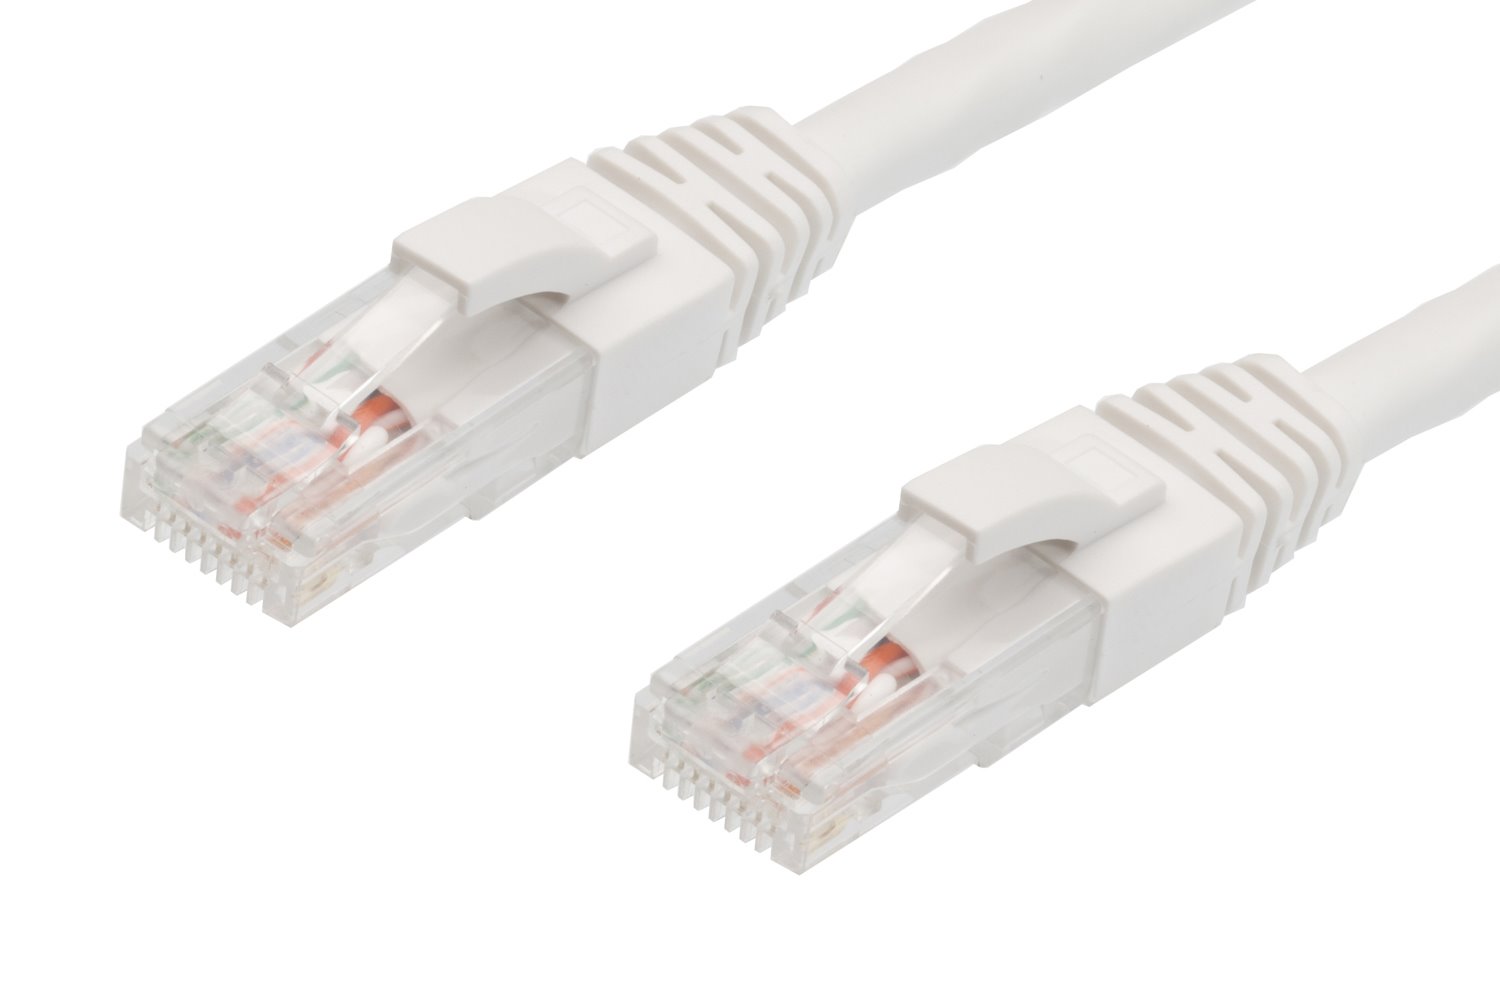 4Cabling 15M RJ45 Cat6 Ethernet Cable. White